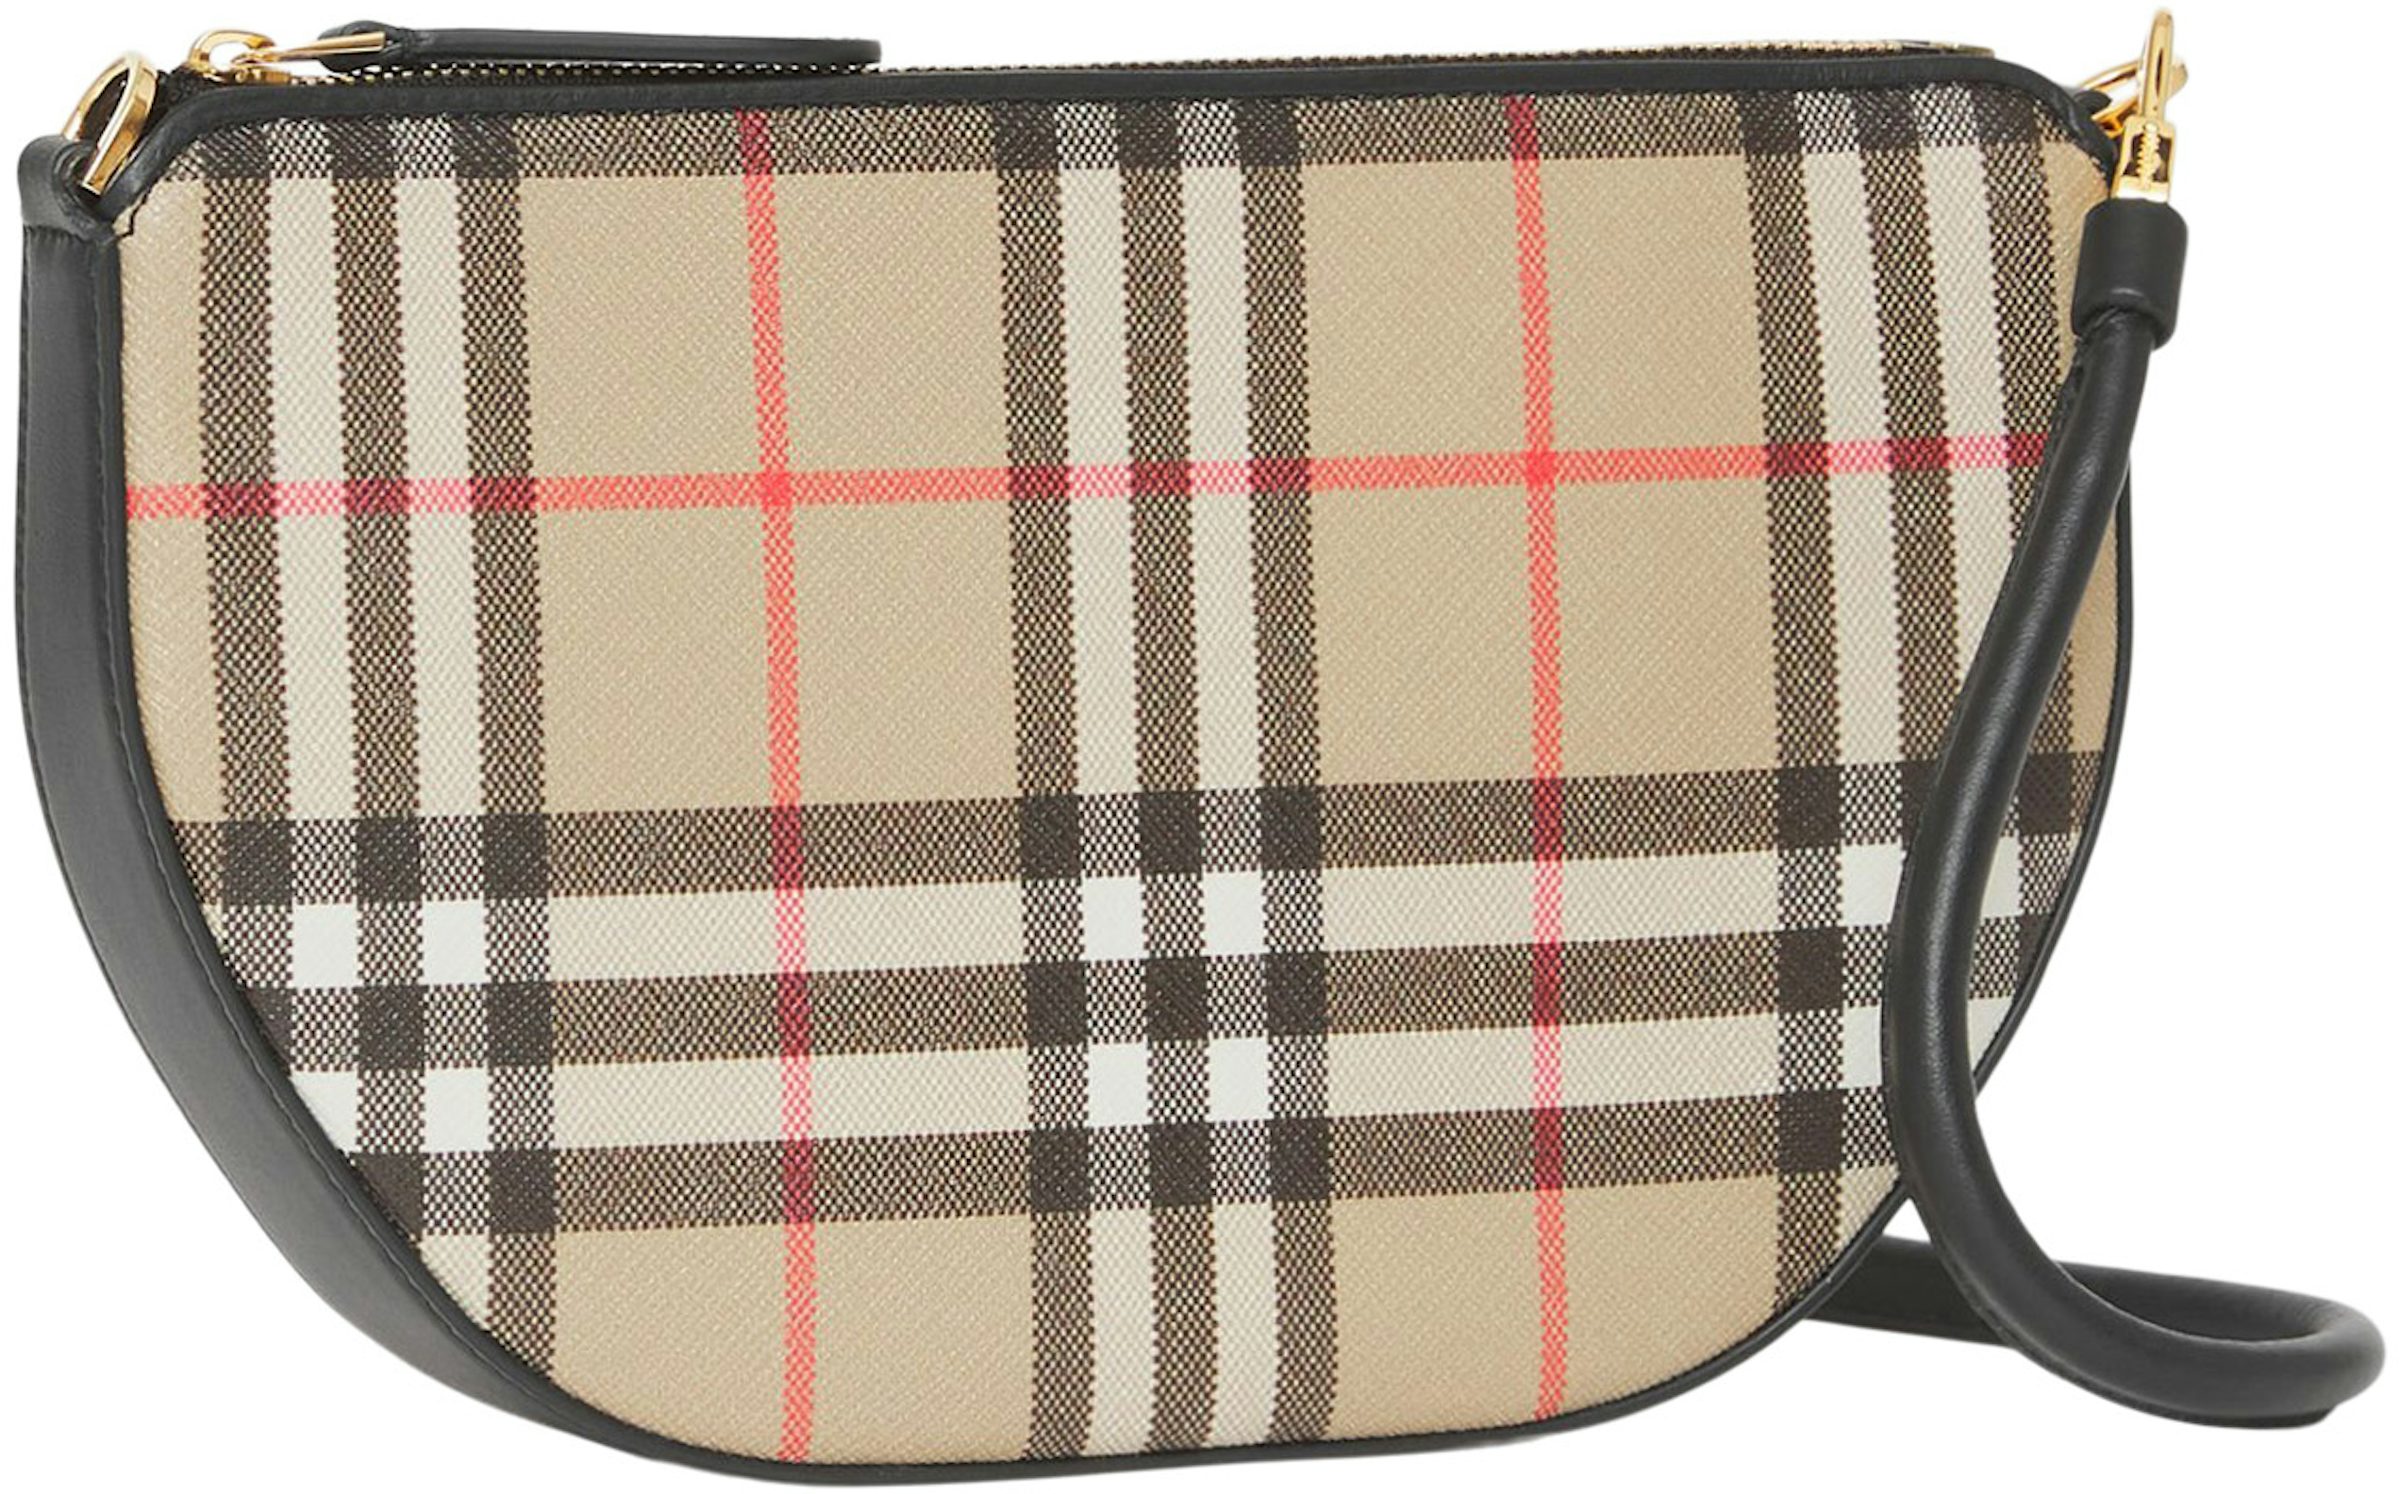 Olympia Pouch Checked Shoulder Bag in Beige - Burberry